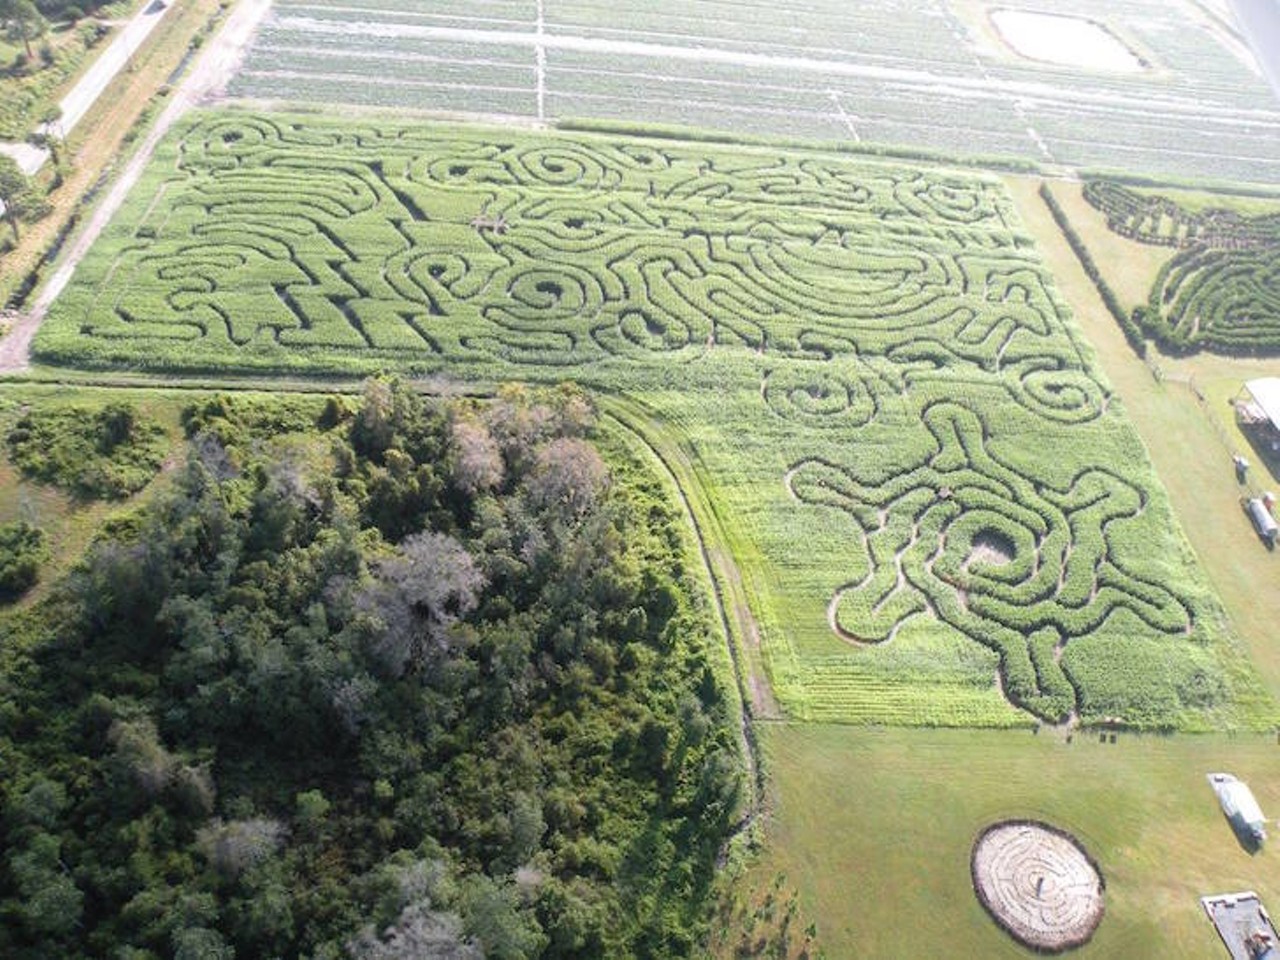 Long & Scott Farms
26216 County Road 448A, Mount Dora, 352-383-6900
Starting as a small 7-acre cornfield, this maze grew into a local tradition. Families can enjoy the twisting pathways of the large corn maze; for the young ones, a small 1-acre maze is available. Other attractions include a gigantic jumping pillow, 60-foot super slide, hayrides, a playground and kid fishing for just $2. The maze opens for its 14th season on Oct. 1 through Dec. 11. Admission is $12 for ages 4 and above.  
Photo via Scott's Maze Adventure/Facebook